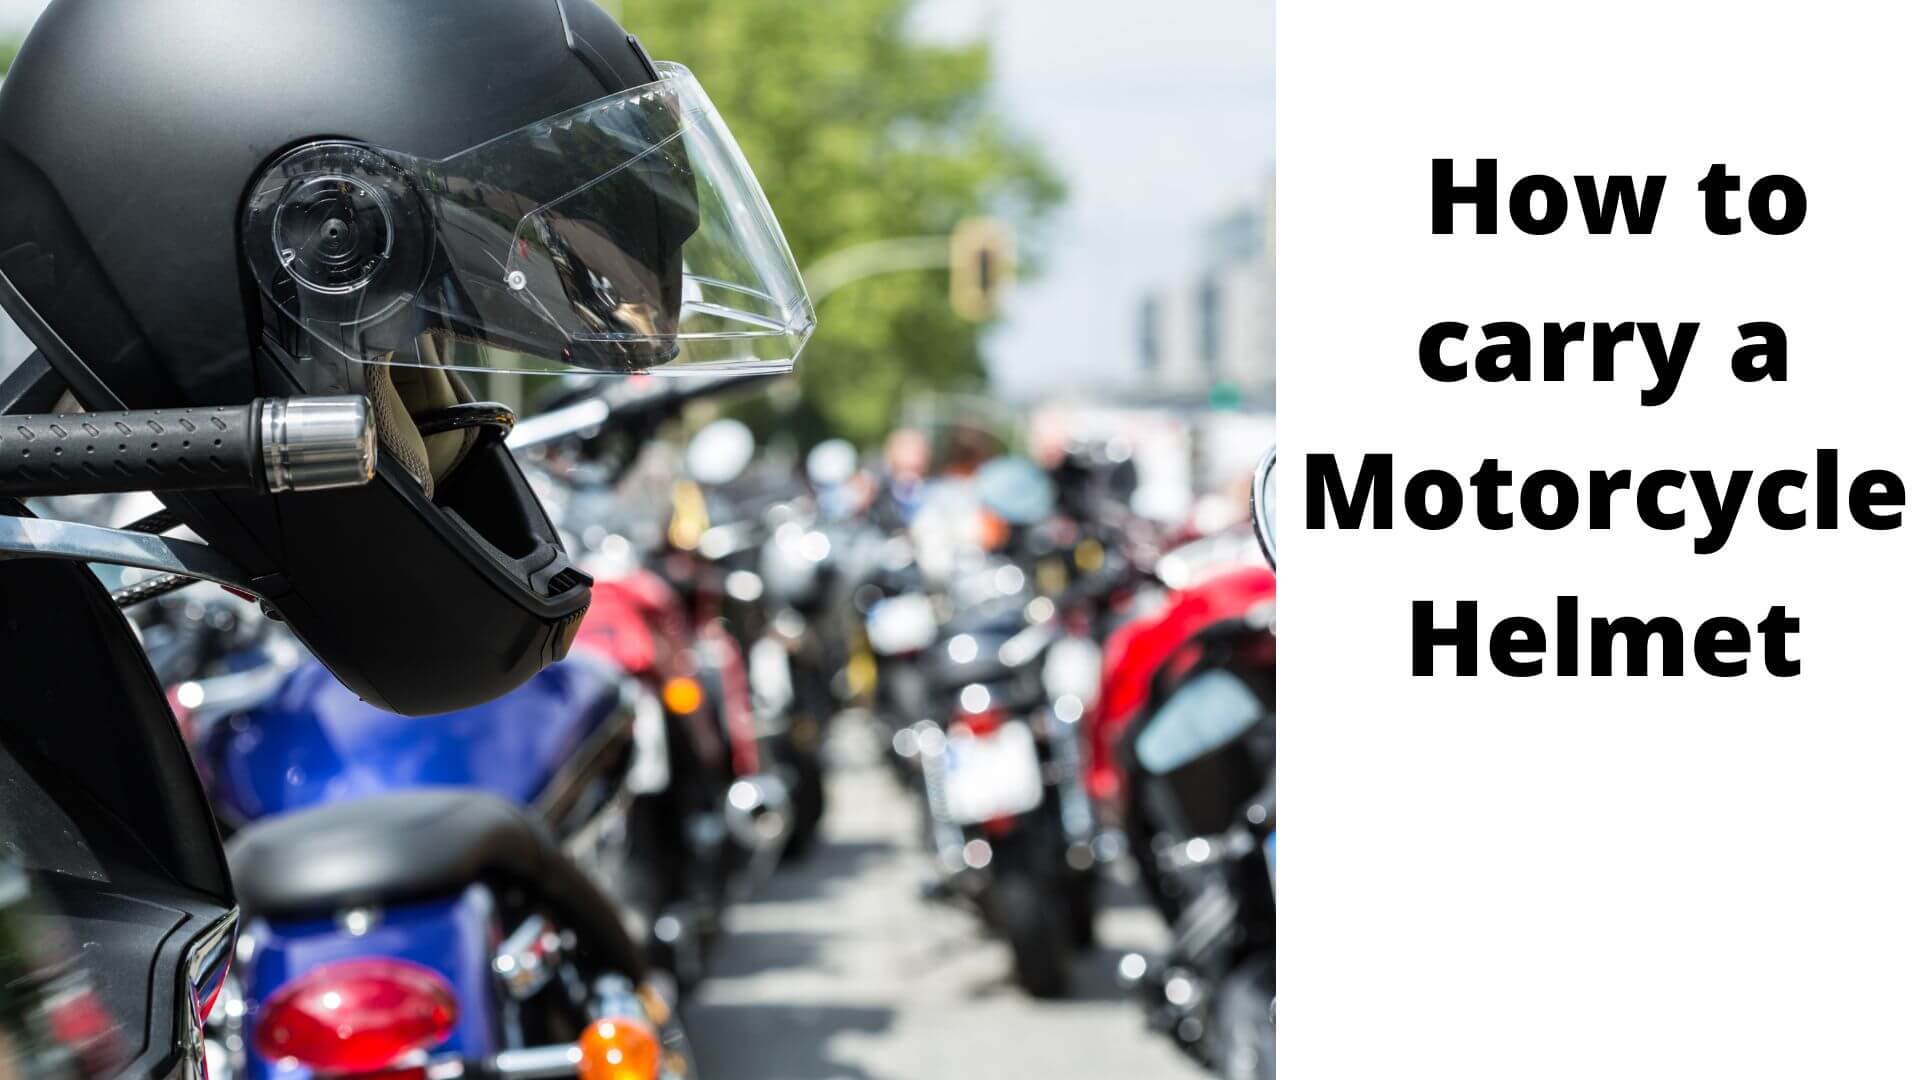 How to Carry a Motorcycle Helmet